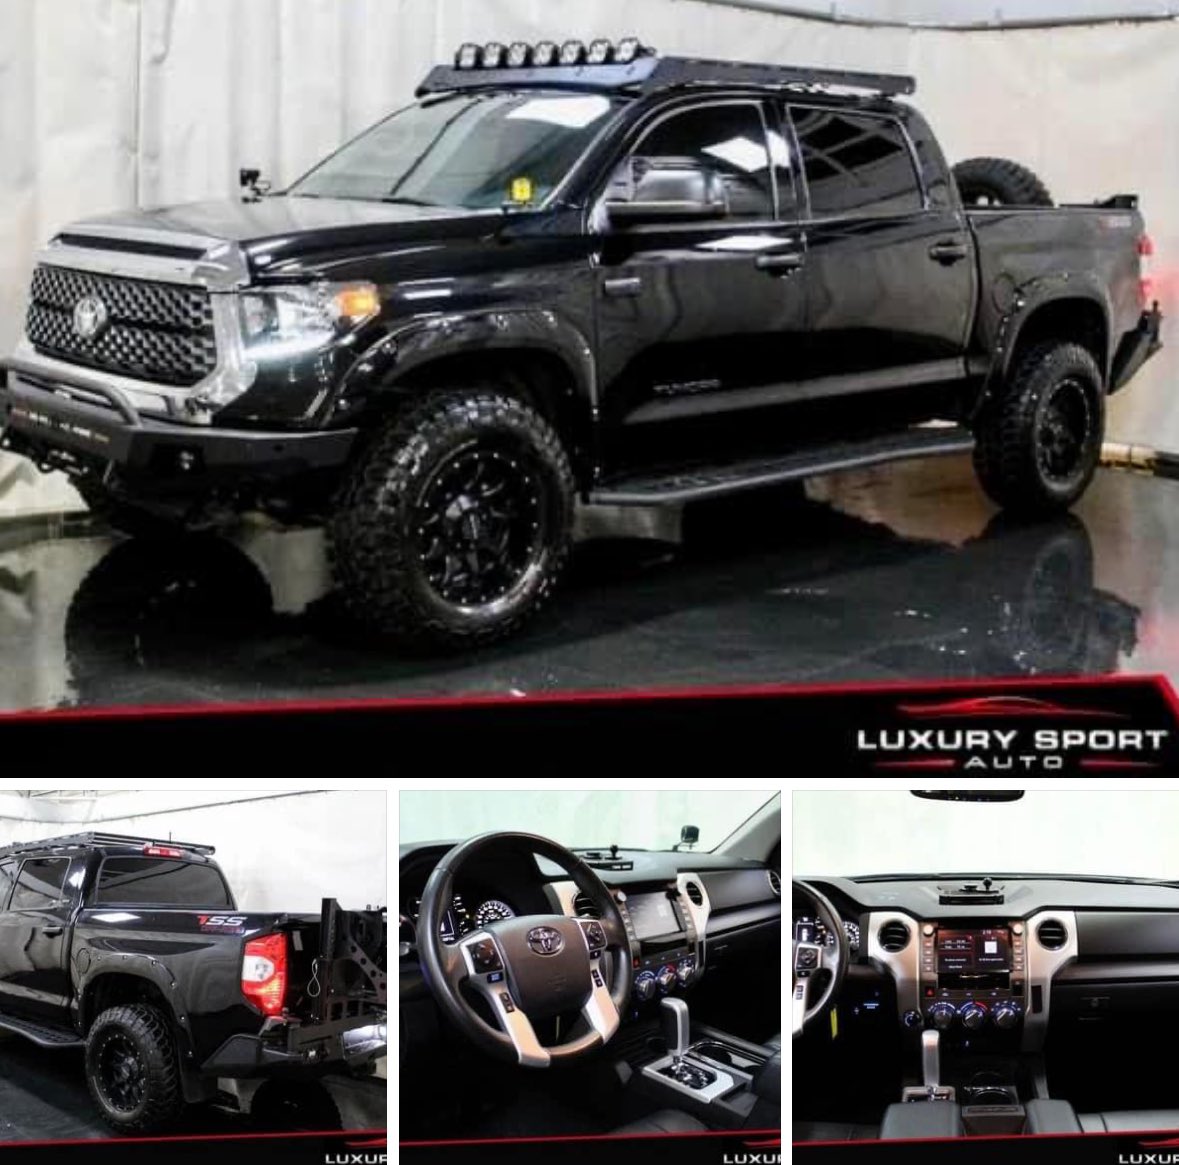 Attention Off-Road Enthusiasts! Just in @LuxurySportAutos: 2020 Toyota Tundra i-Force 5.7L V8 with only 42,000 miles and over $20,000 in upgrades! 🚀 A true one-of-a-kind Tundra, ready for any adventure! Text/call 360-281-2224 #LuxurySportAutos #ToyotaTundra #OffRoadReady #Lifted